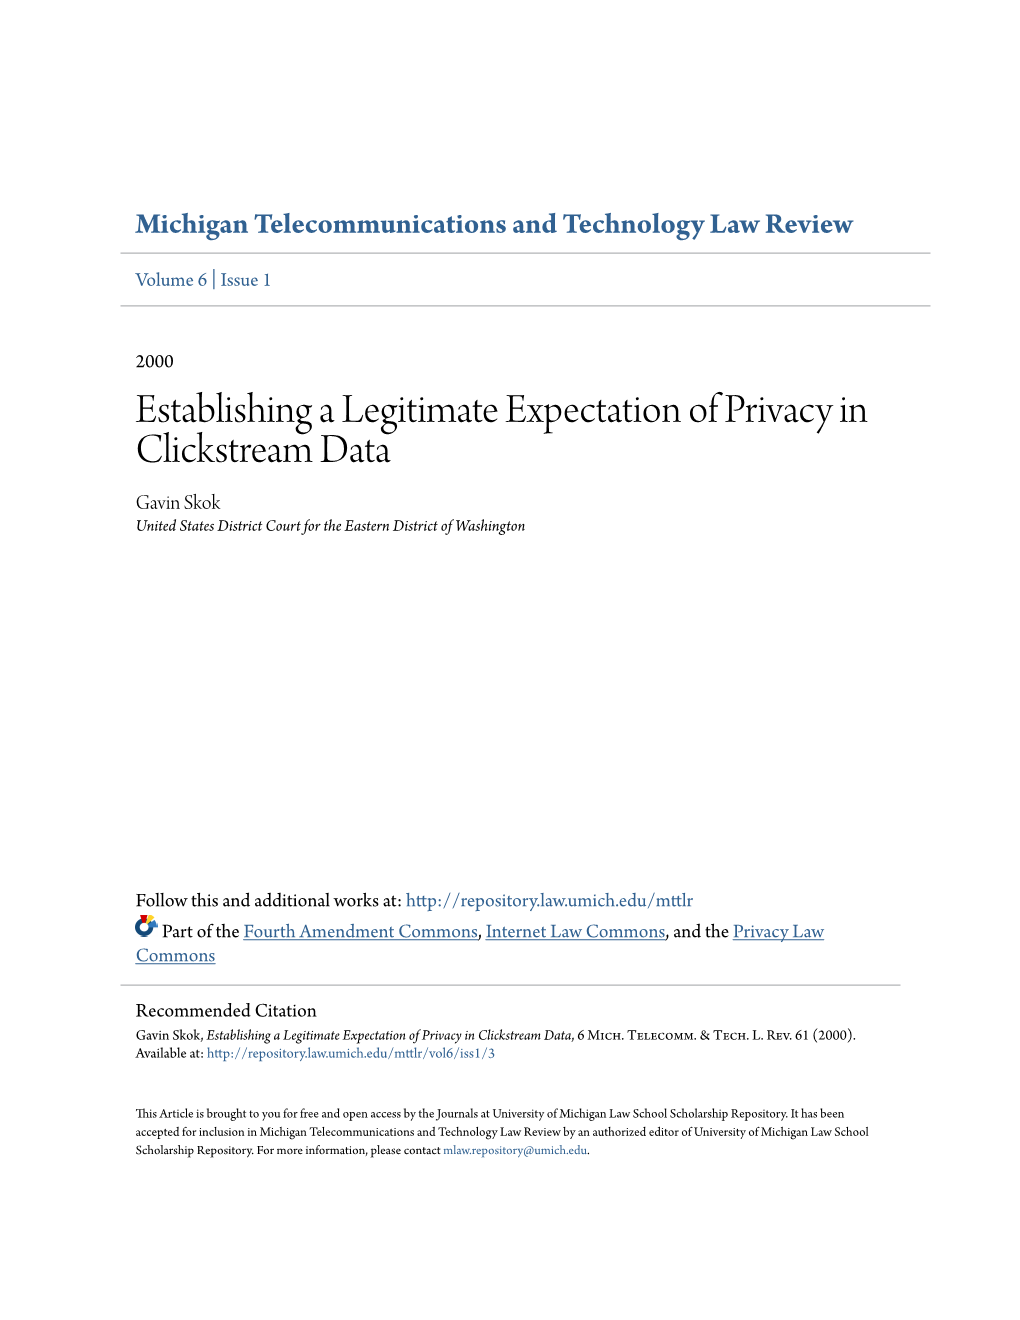 Establishing a Legitimate Expectation of Privacy in Clickstream Data Gavin Skok United States District Court for the Eastern District of Washington